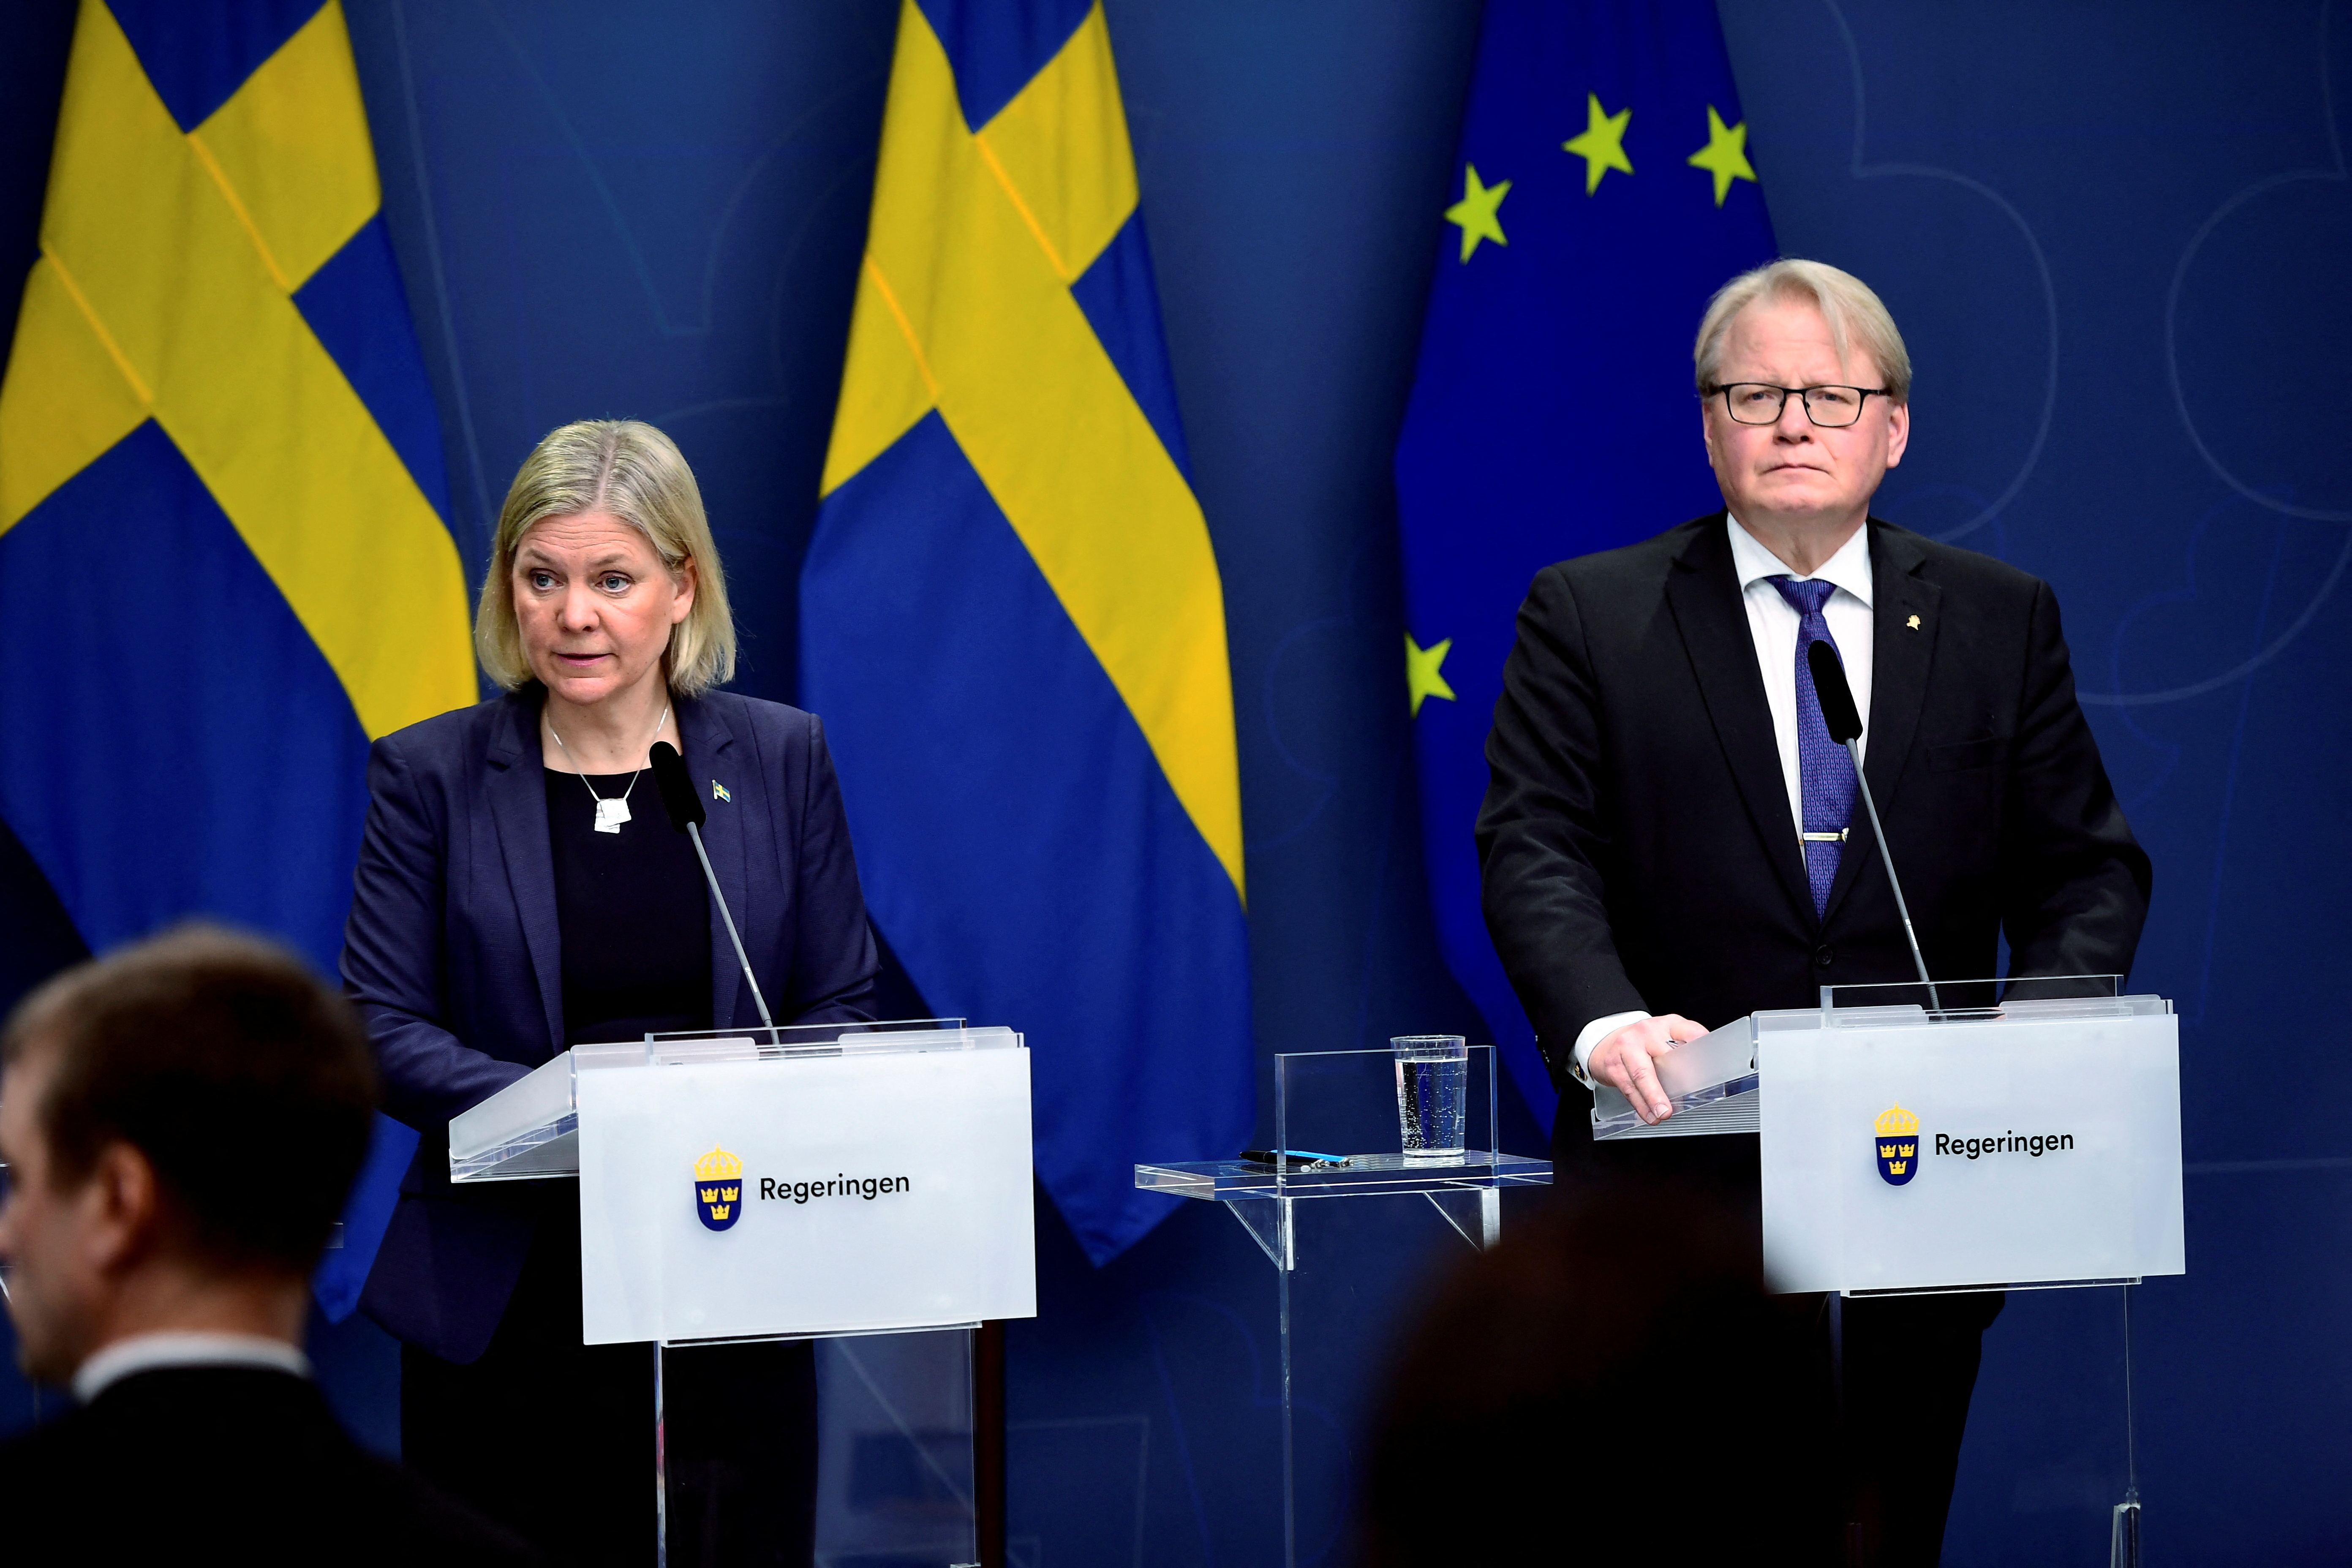 Sweden's Prime Minister Magdalena Andersson and Sweden's Minister of Defense Peter Hultqvist comment on Russia's attack on Ukraine, at a press conference in the government building Rosenbad, in Stockholm, Sweden February 24, 2022. Paul Wennerholm /TT News Agency/via REUTERS      